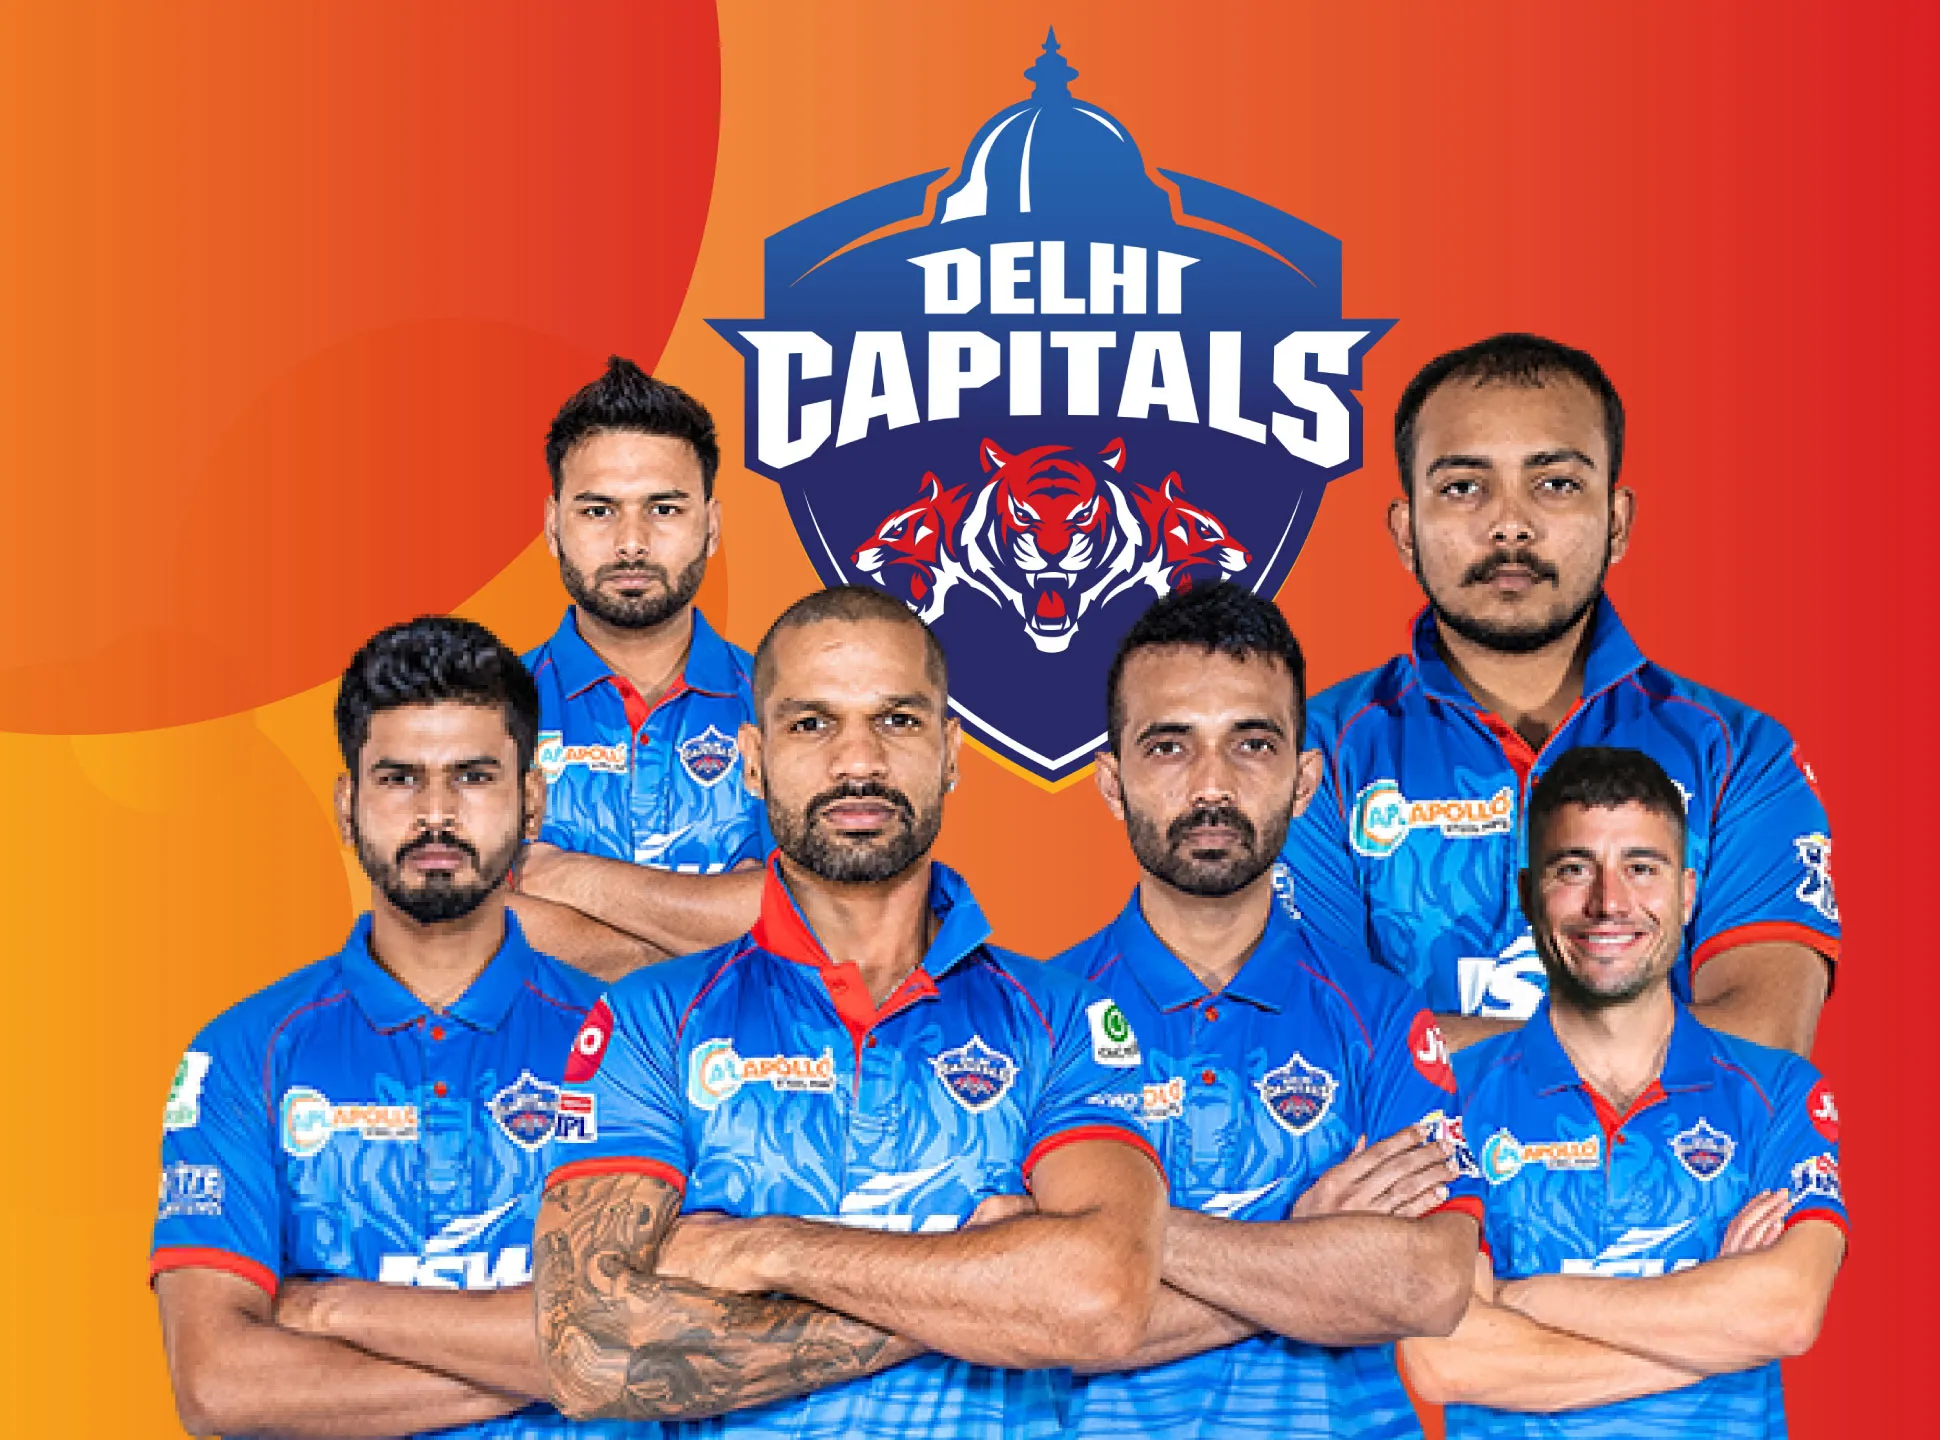 Delhi Capitals can rely on these players on the IPL.